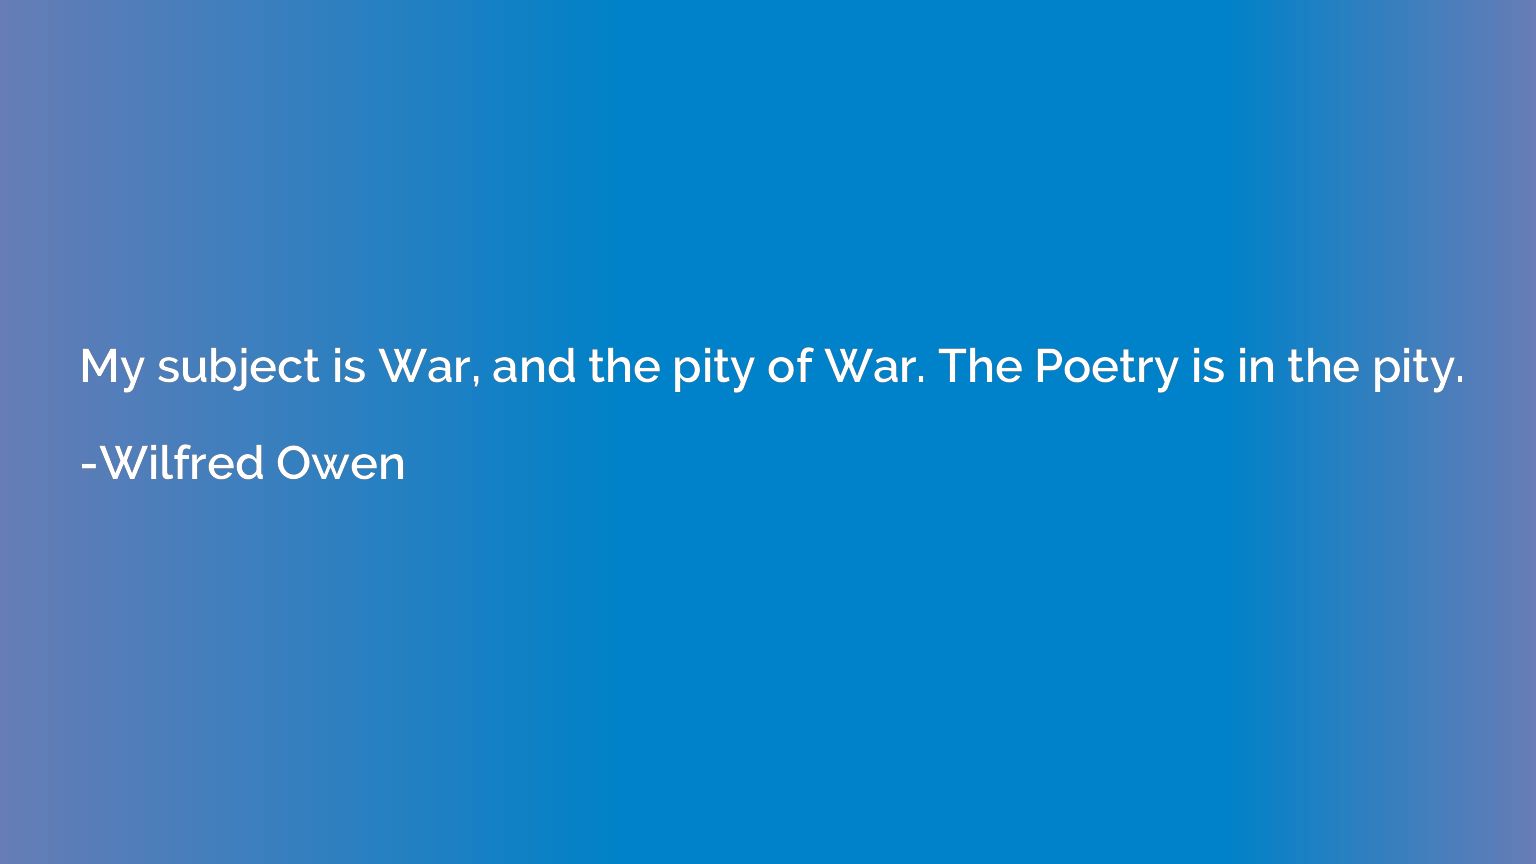 My subject is War, and the pity of War. The Poetry is in the